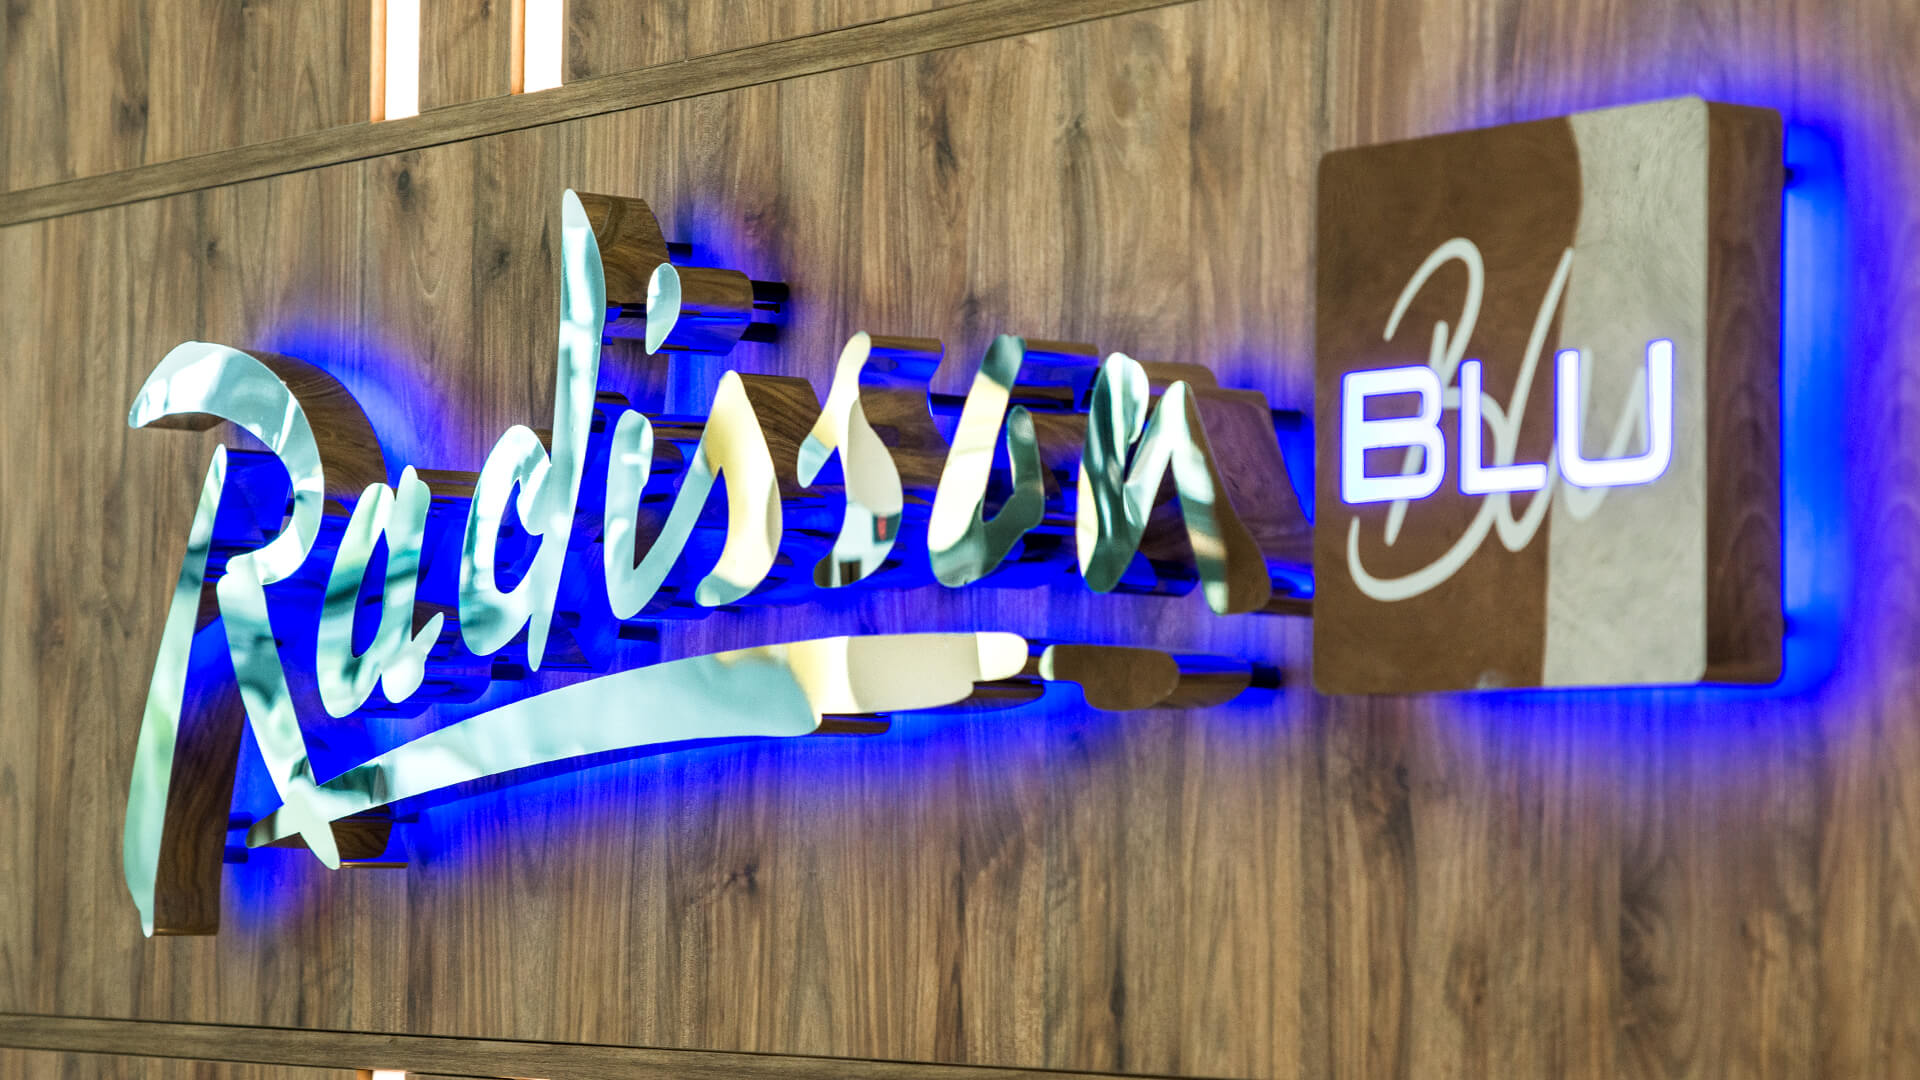 radisson sopot blu hotel - radisson-blue-letter-from-silver-plate-gold-letter-behind-reception-in-hotel-on-a-wood-wall-letters-lit-from-back-to-blue-sopot-logo-company-exclusive-glamour